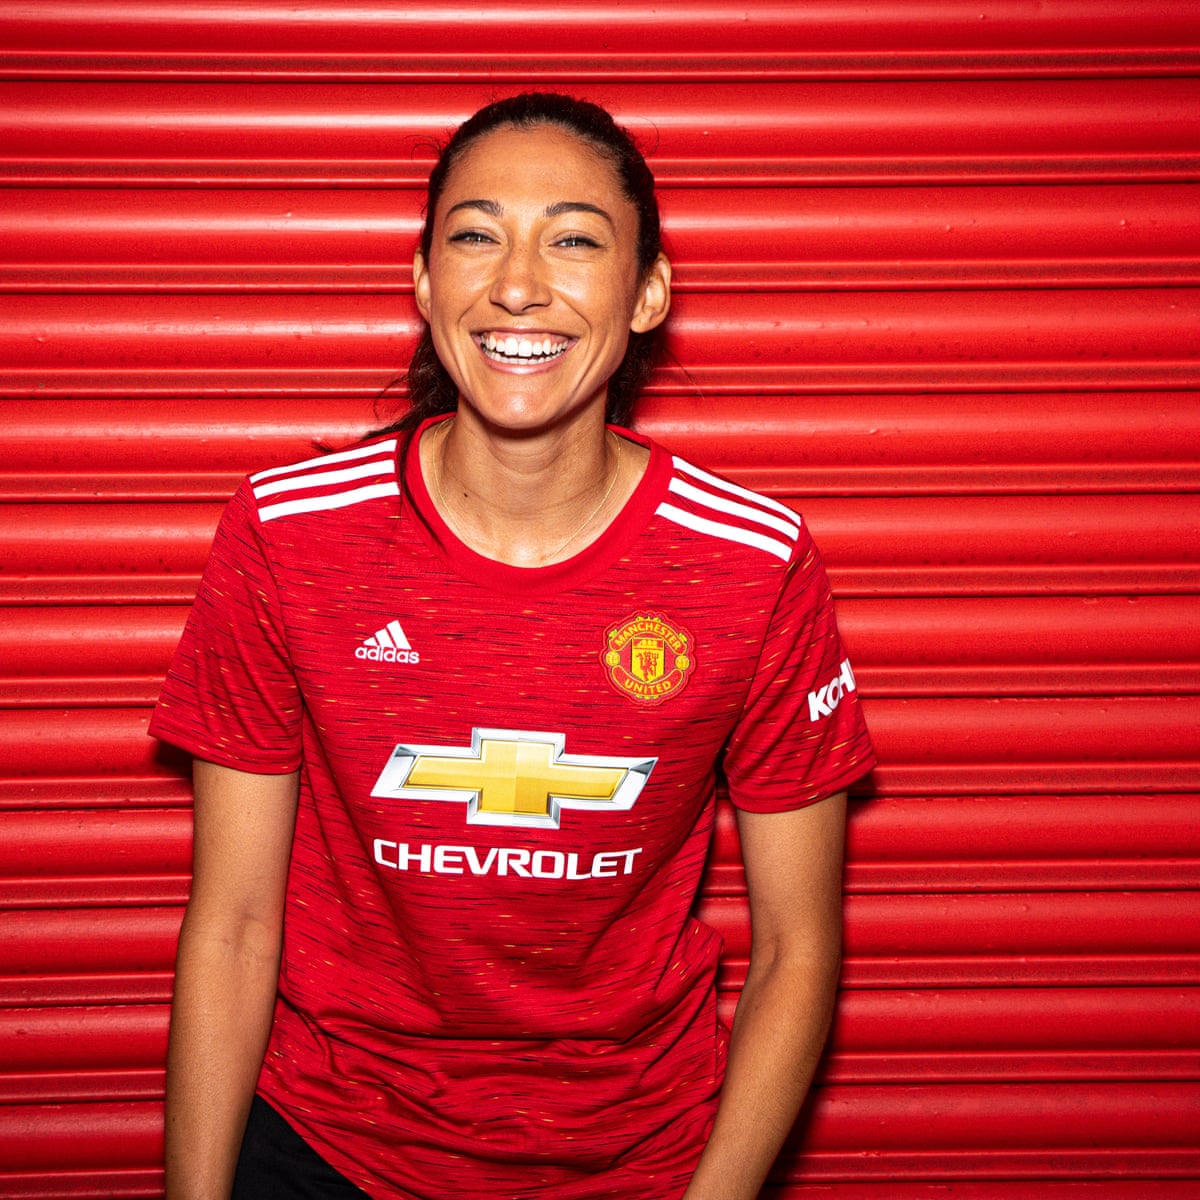 The 23-year old daughter of father (?) and mother(?) Christen Press in 2022 photo. Christen Press earned a  million dollar salary - leaving the net worth at  million in 2022